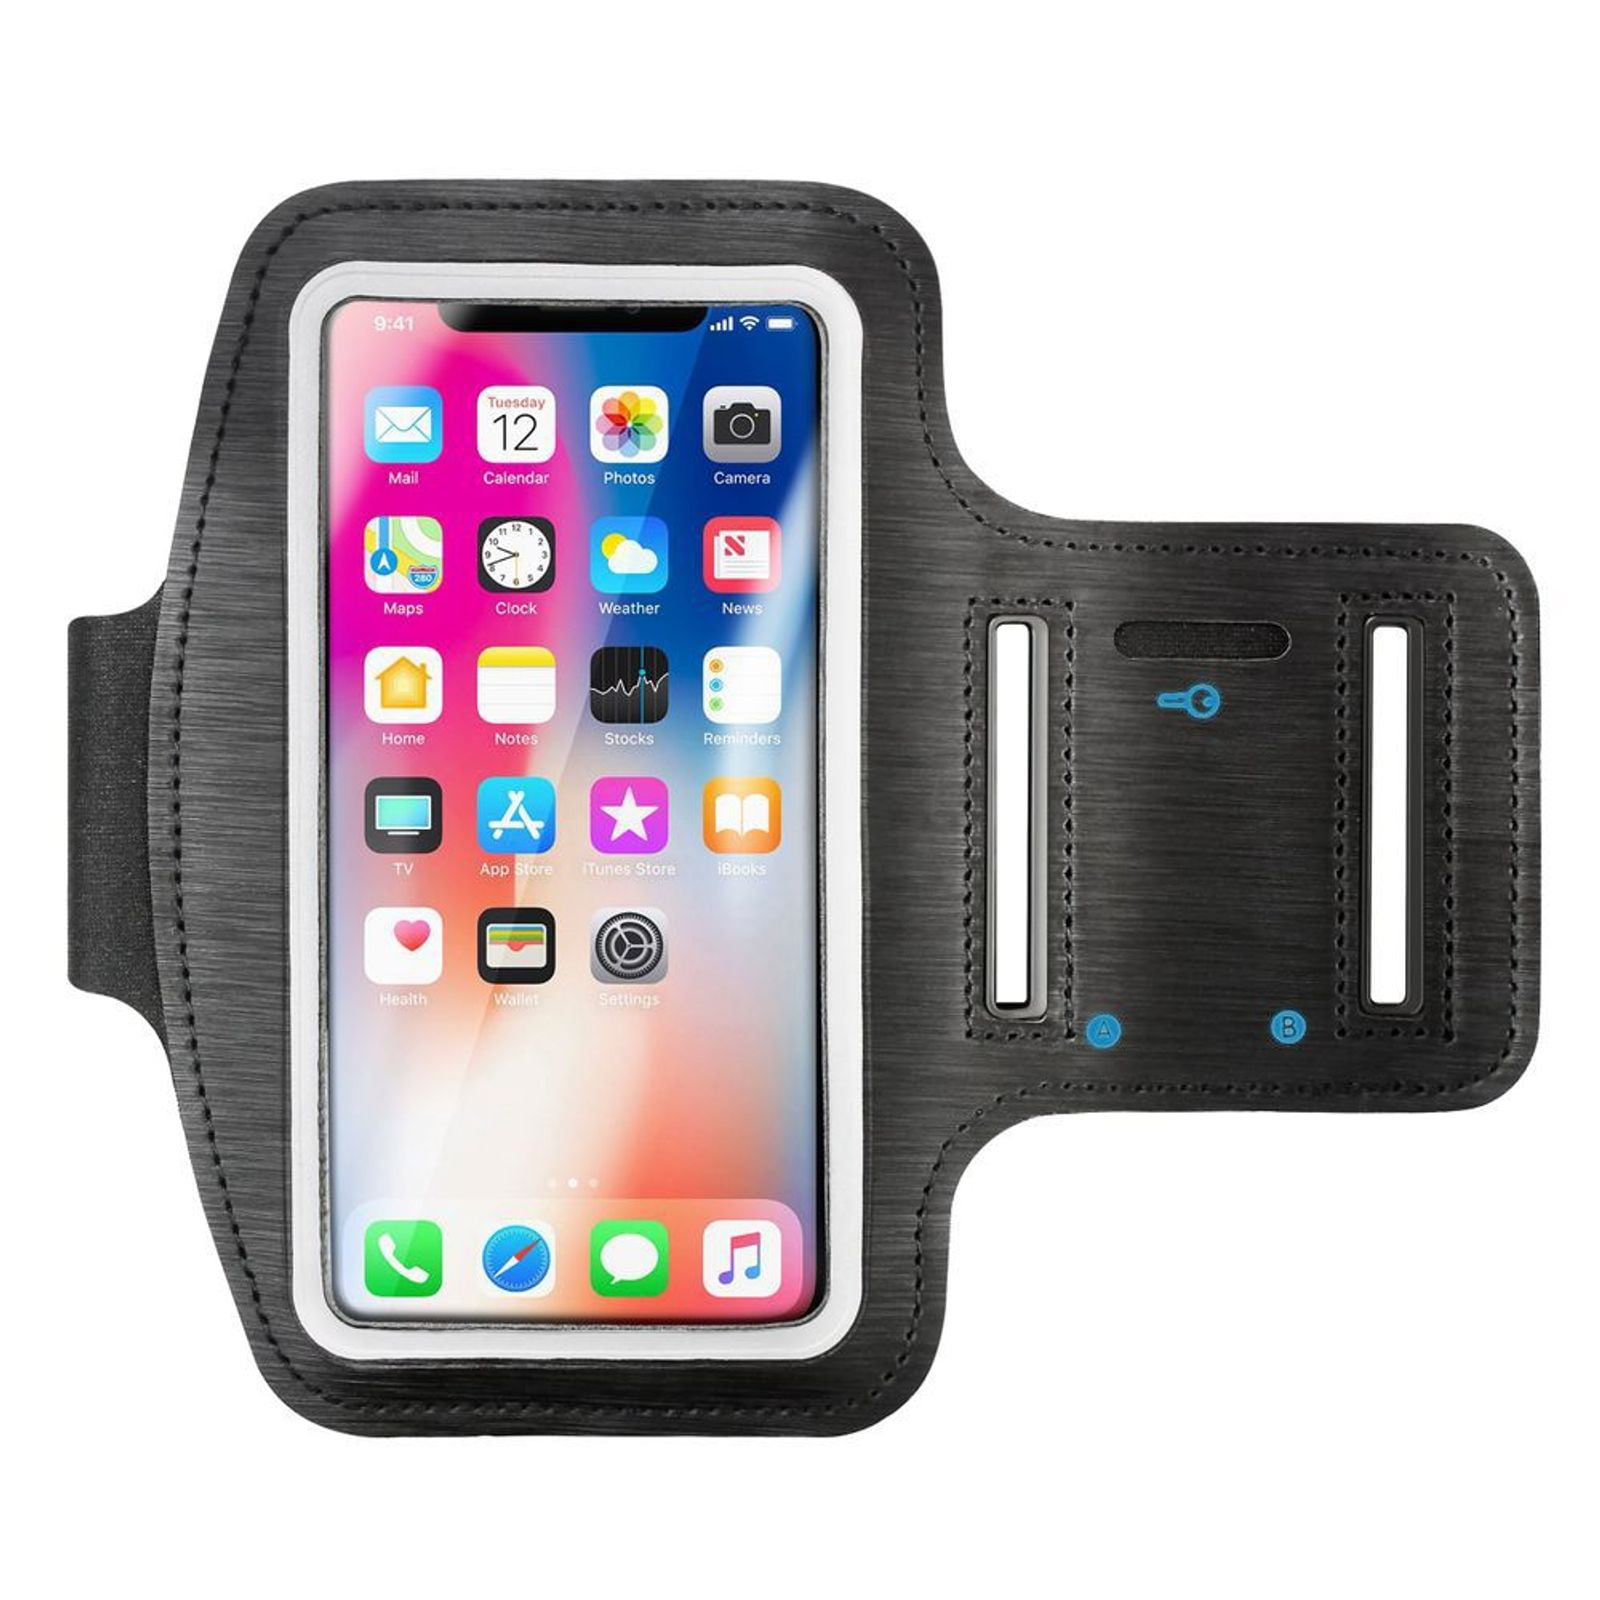 SPORTS RUNNING GYM ARMBAND STRAP CASE FOR For VARIOUS SAMSUNG GALAXY S8 S8 PLUS 